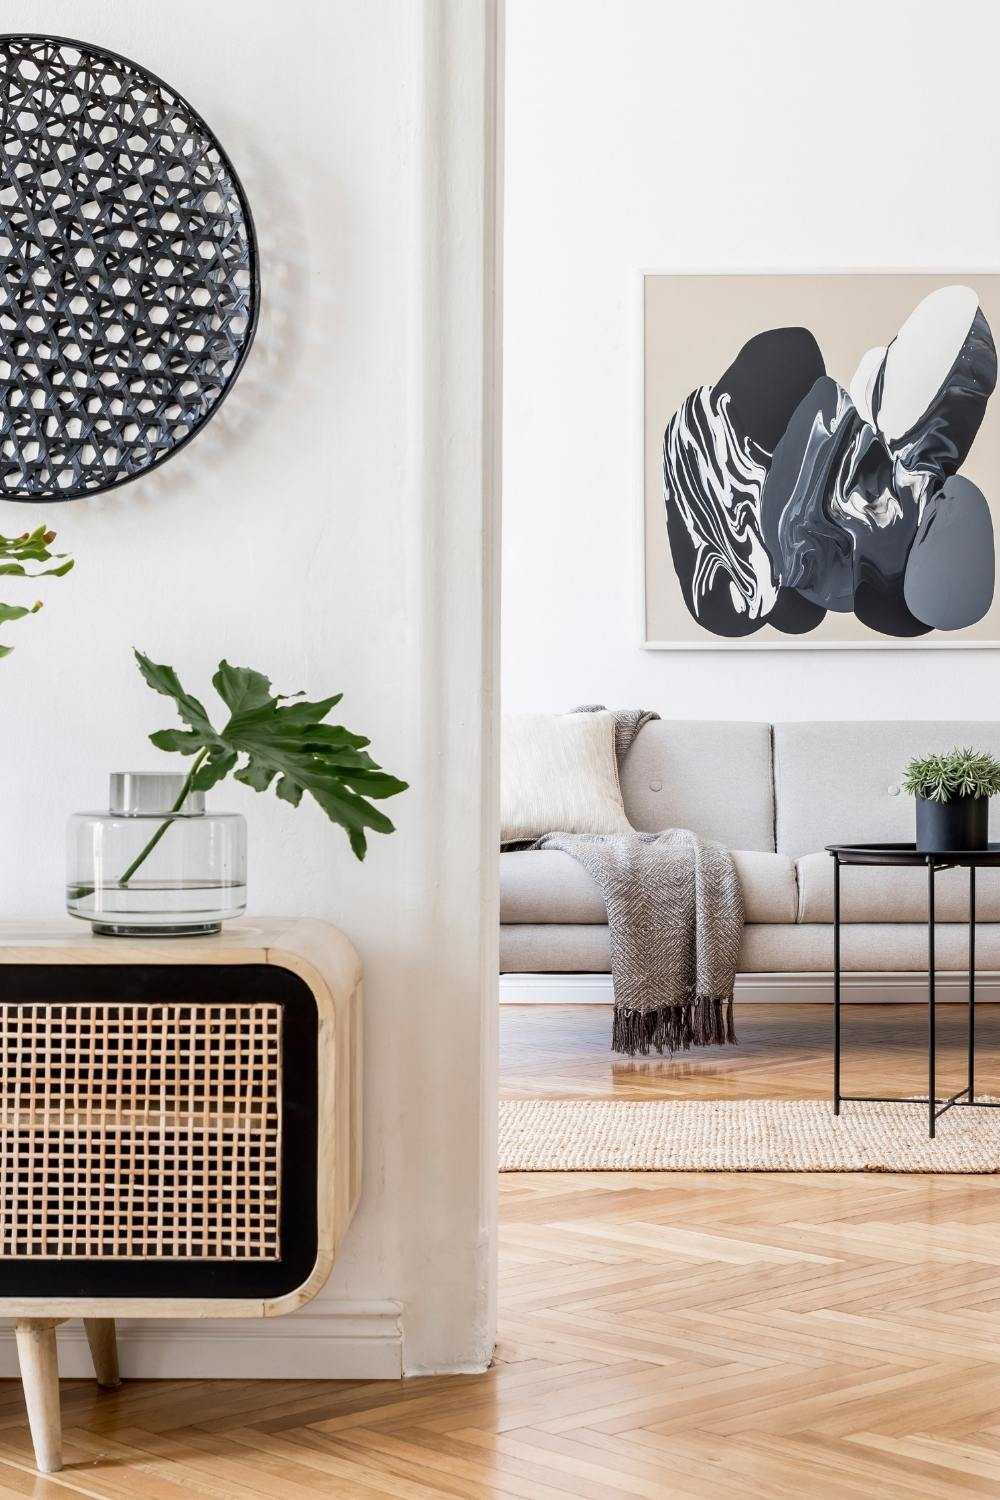 10 Budget-friendly Home Decor Ideas You Should Know - The European Business  Review